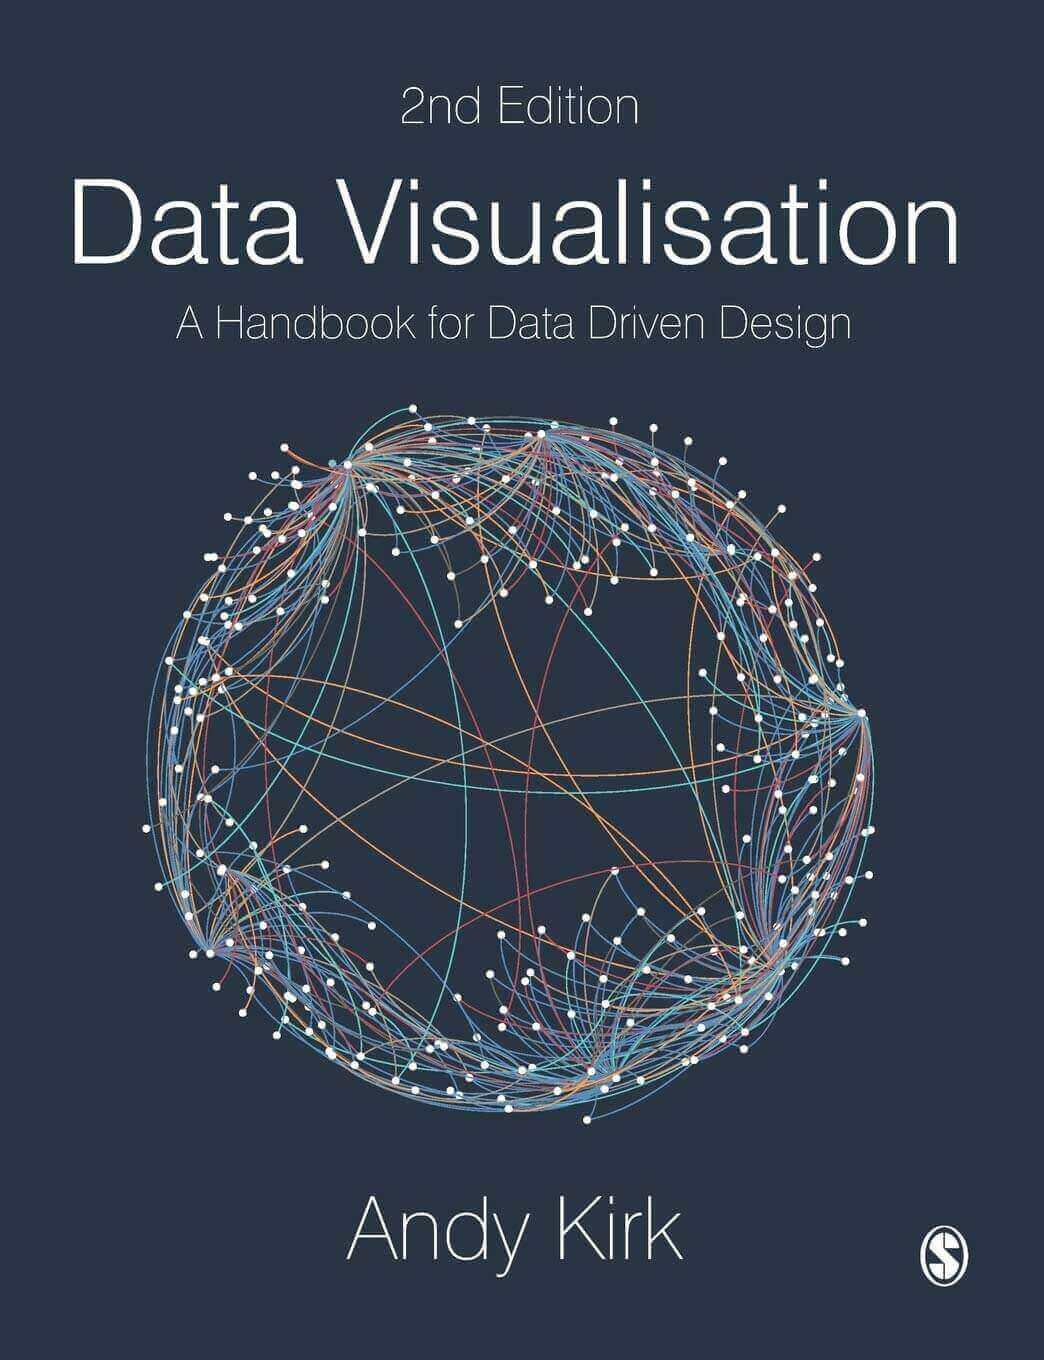 “Data Visualization: A Handbook for Data Driven Design” by Andy Kirk